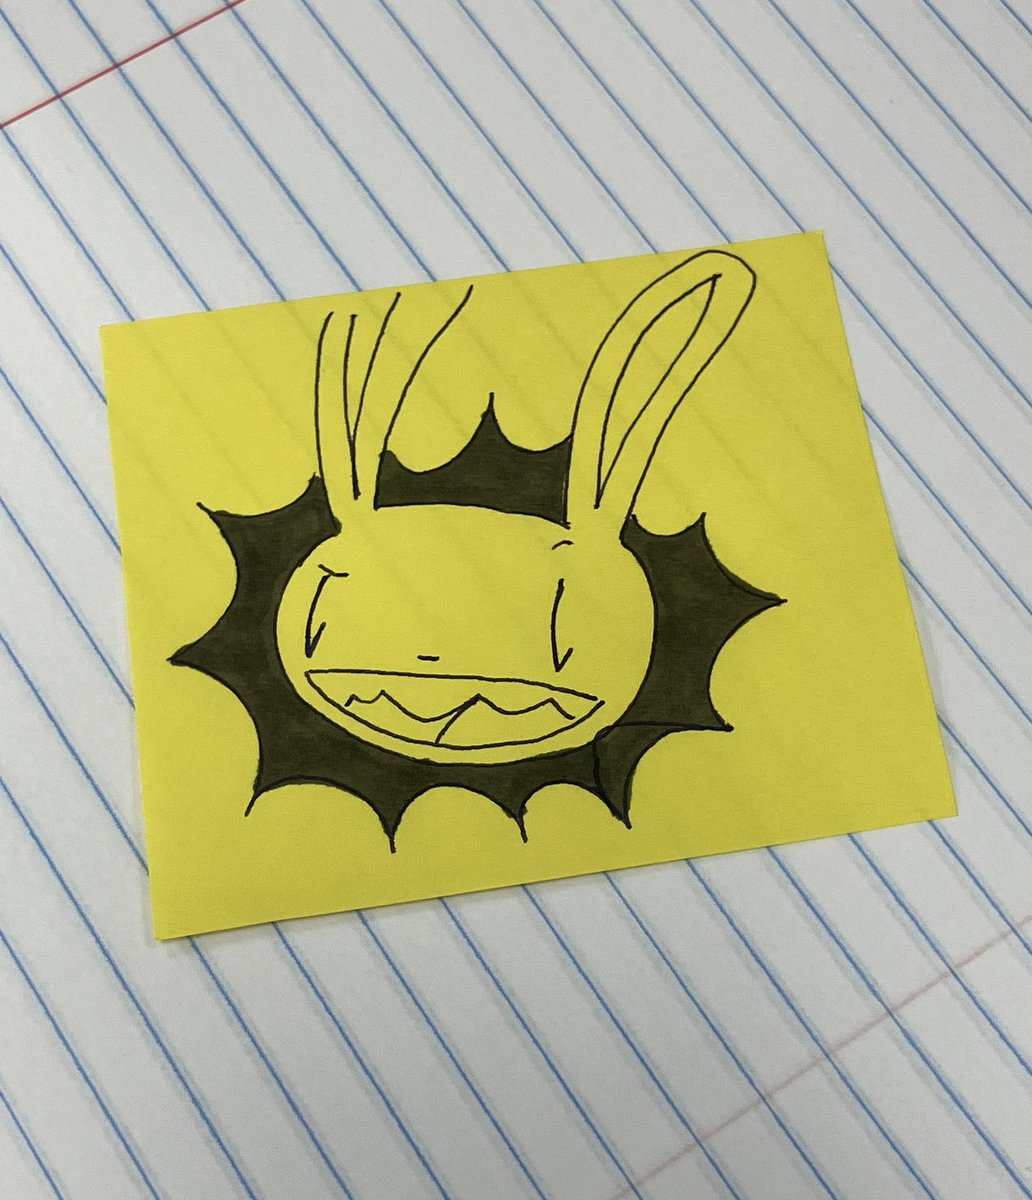 Work is slow as helllll save me post-it max